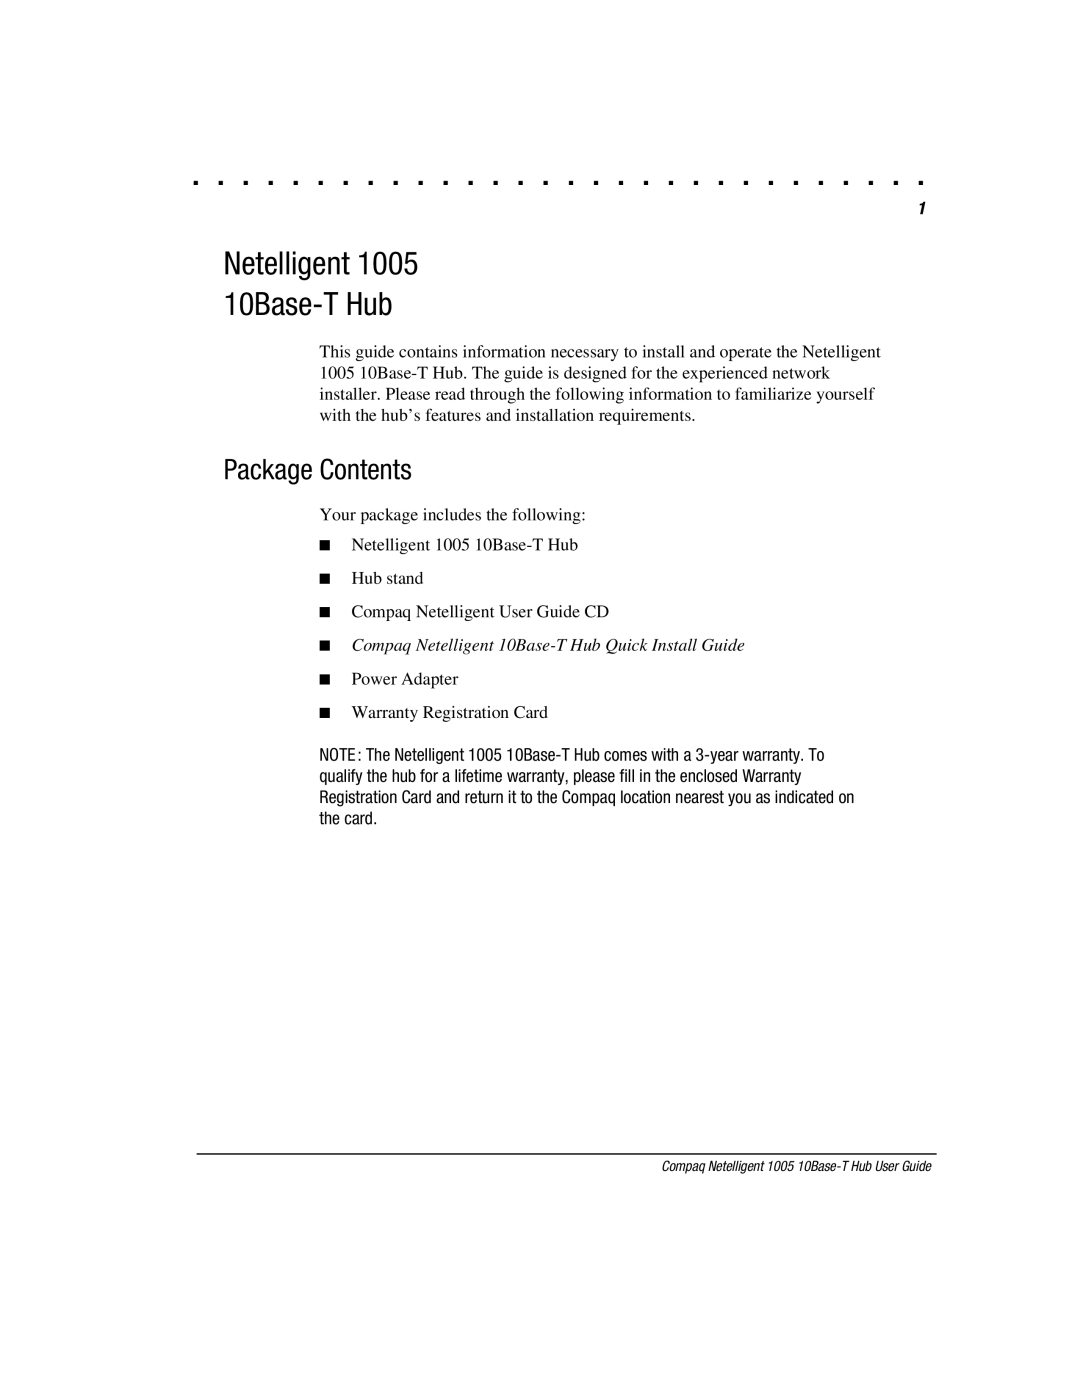 Compaq manual Package Contents, Netelligent 1005 10Base-T Hub, Q Compaq Netelligent 10Base-T Hub Quick Install Guide 